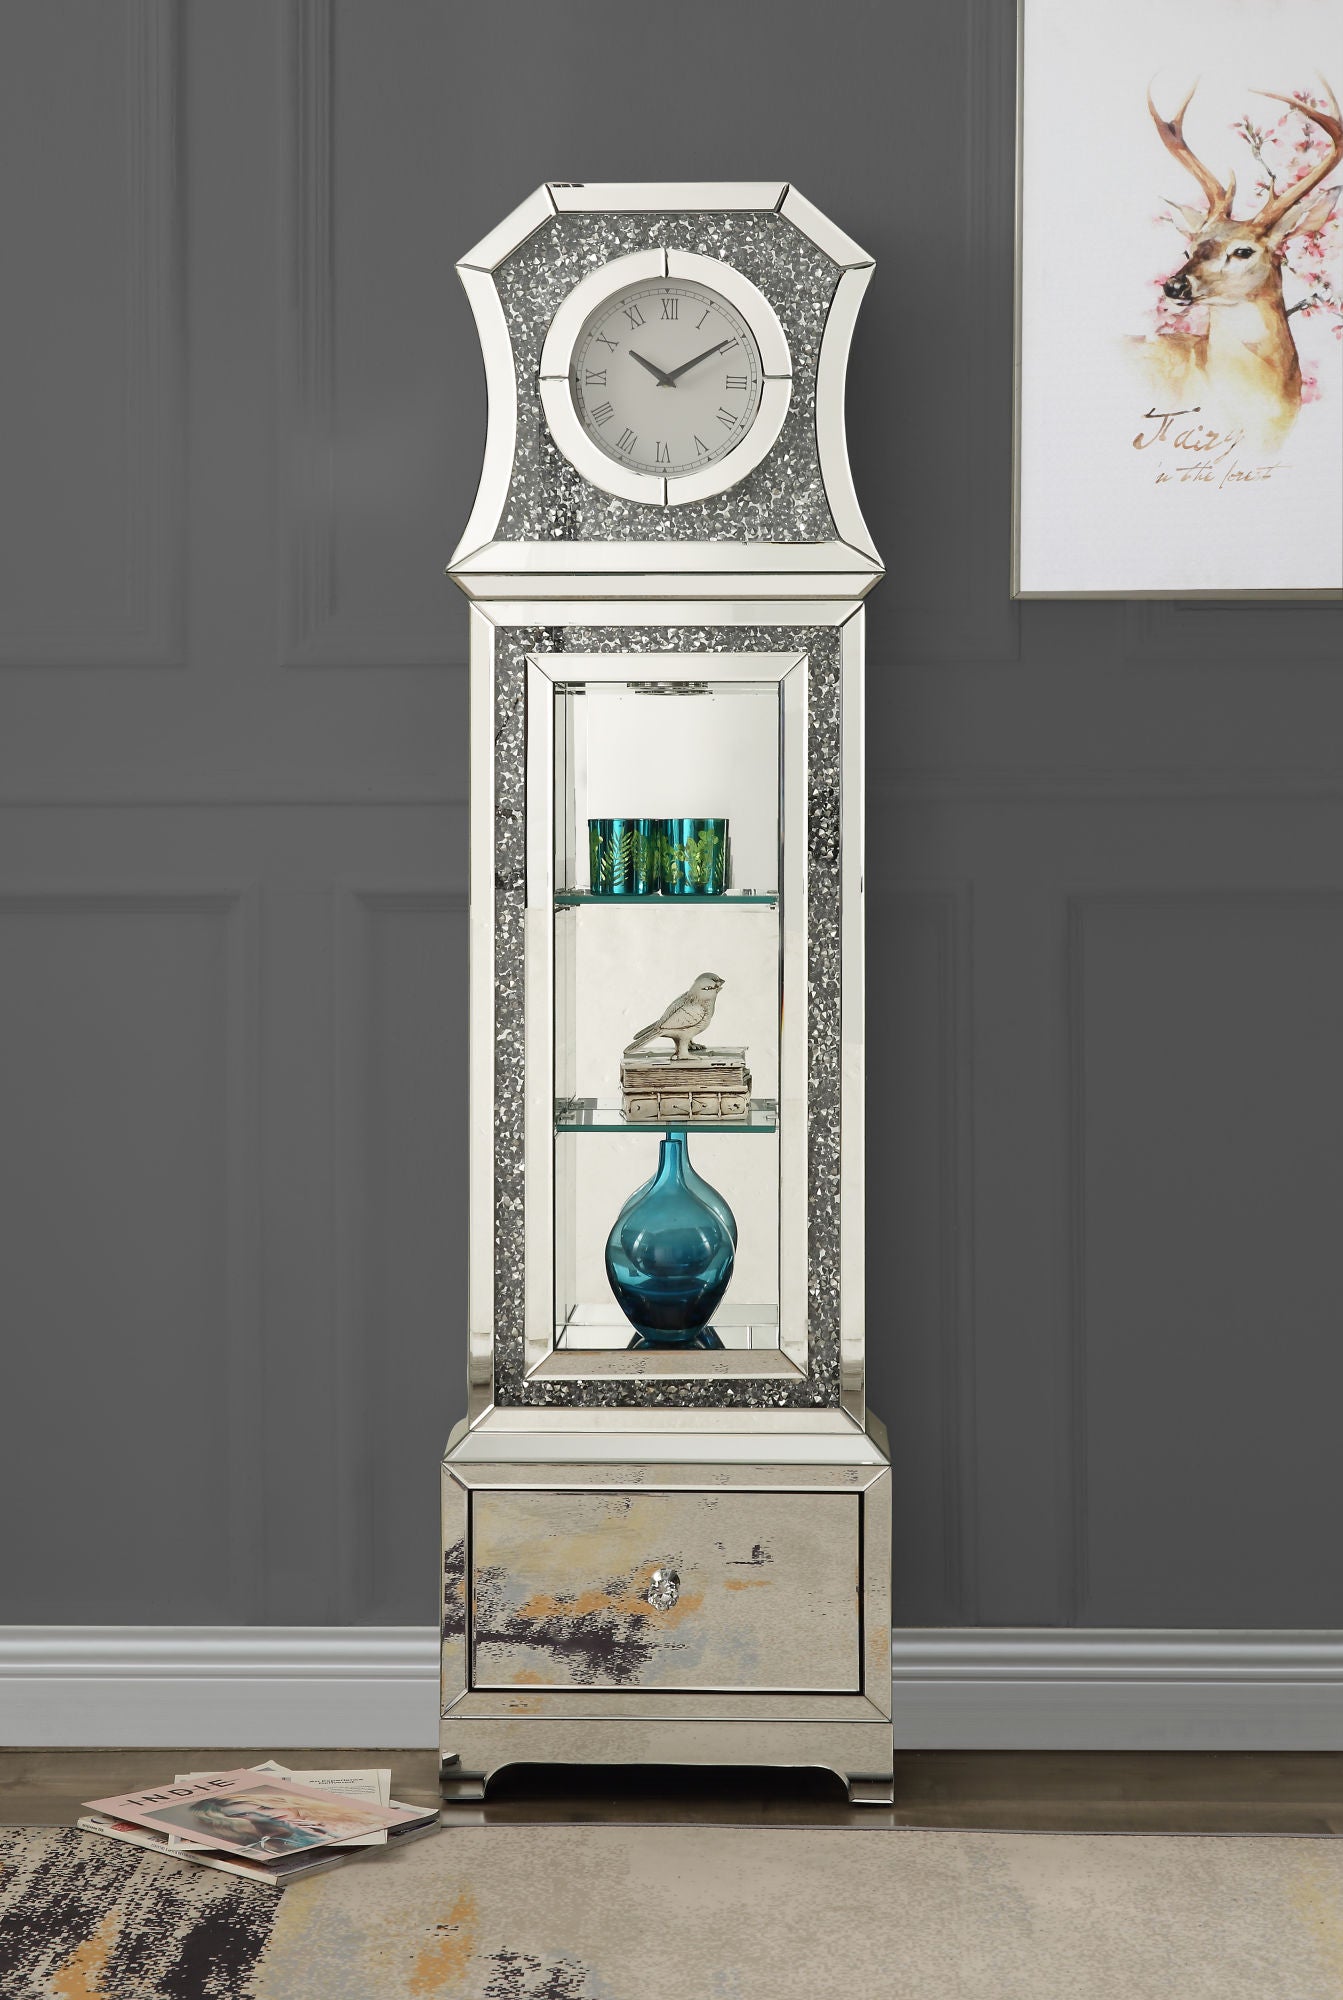 ACME Noralie GRANDFATHER CLOCK W/LED Mirrored & Faux Diamonds AC00350 Home Decor by Design